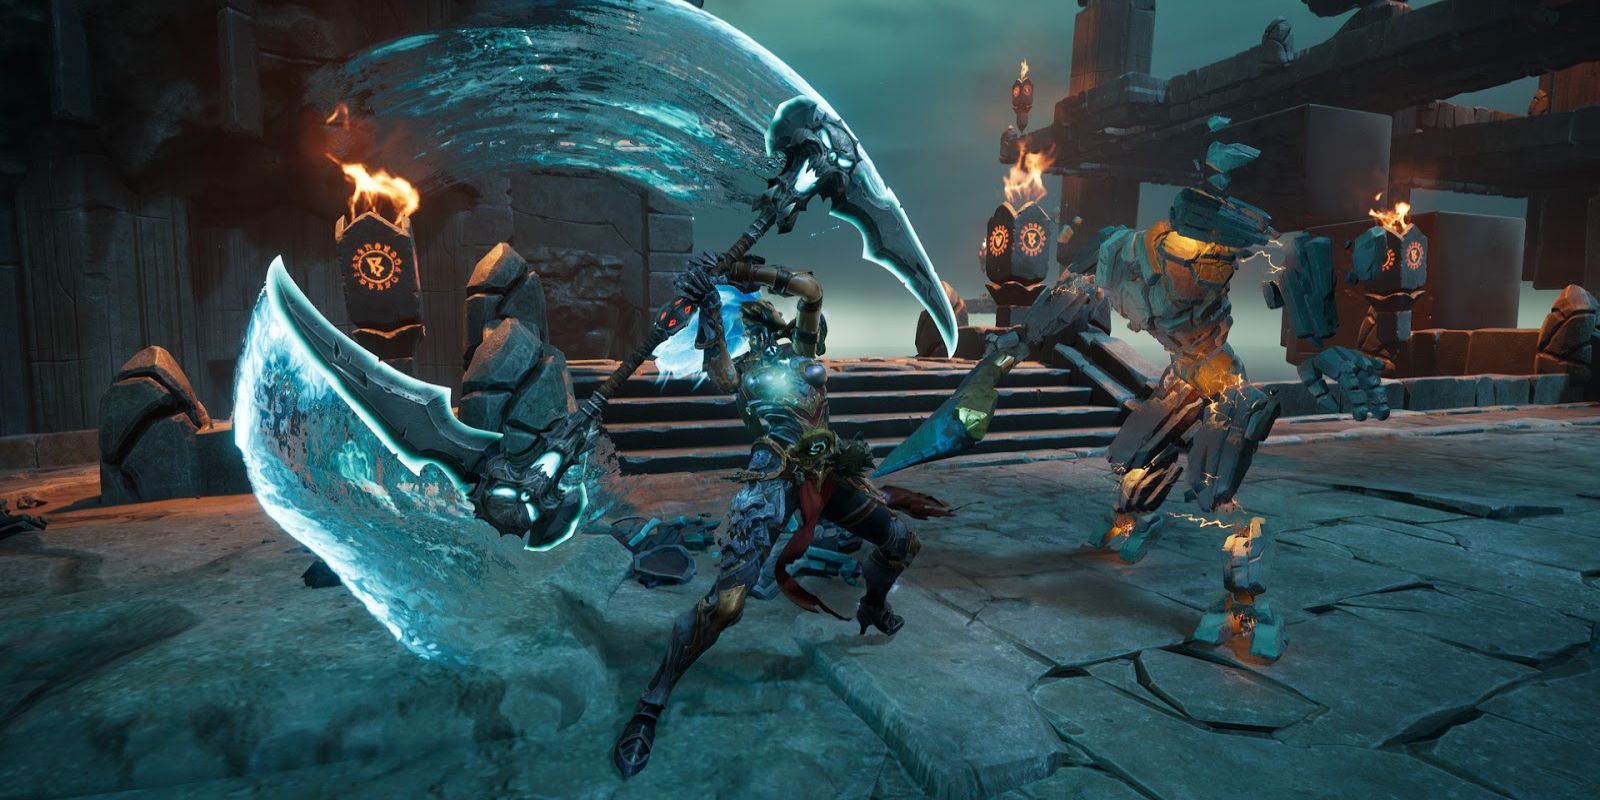 A screenshot from the video game Darksiders 3.